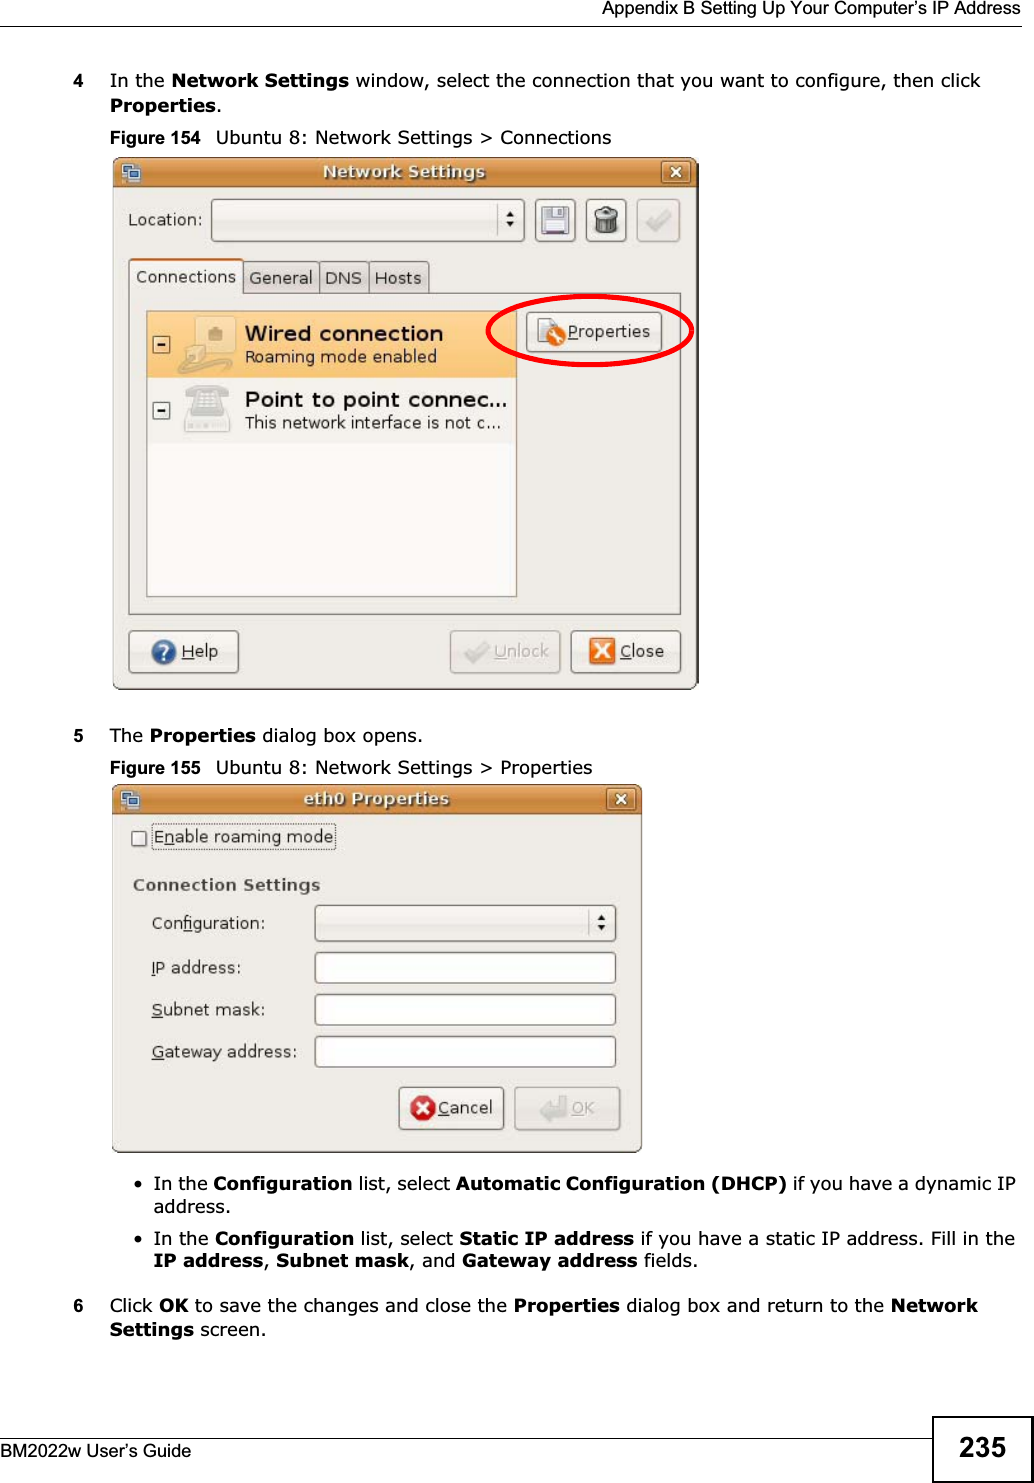  Appendix B Setting Up Your Computer’s IP AddressBM2022w User’s Guide 2354In the Network Settings window, select the connection that you want to configure, then click Properties.Figure 154   Ubuntu 8: Network Settings &gt; Connections5The Properties dialog box opens.Figure 155   Ubuntu 8: Network Settings &gt; Properties•In the Configuration list, select Automatic Configuration (DHCP) if you have a dynamic IP address.•In the Configuration list, select Static IP address if you have a static IP address. Fill in the IP address,Subnet mask, and Gateway address fields. 6Click OK to save the changes and close the Properties dialog box and return to the Network Settings screen. 